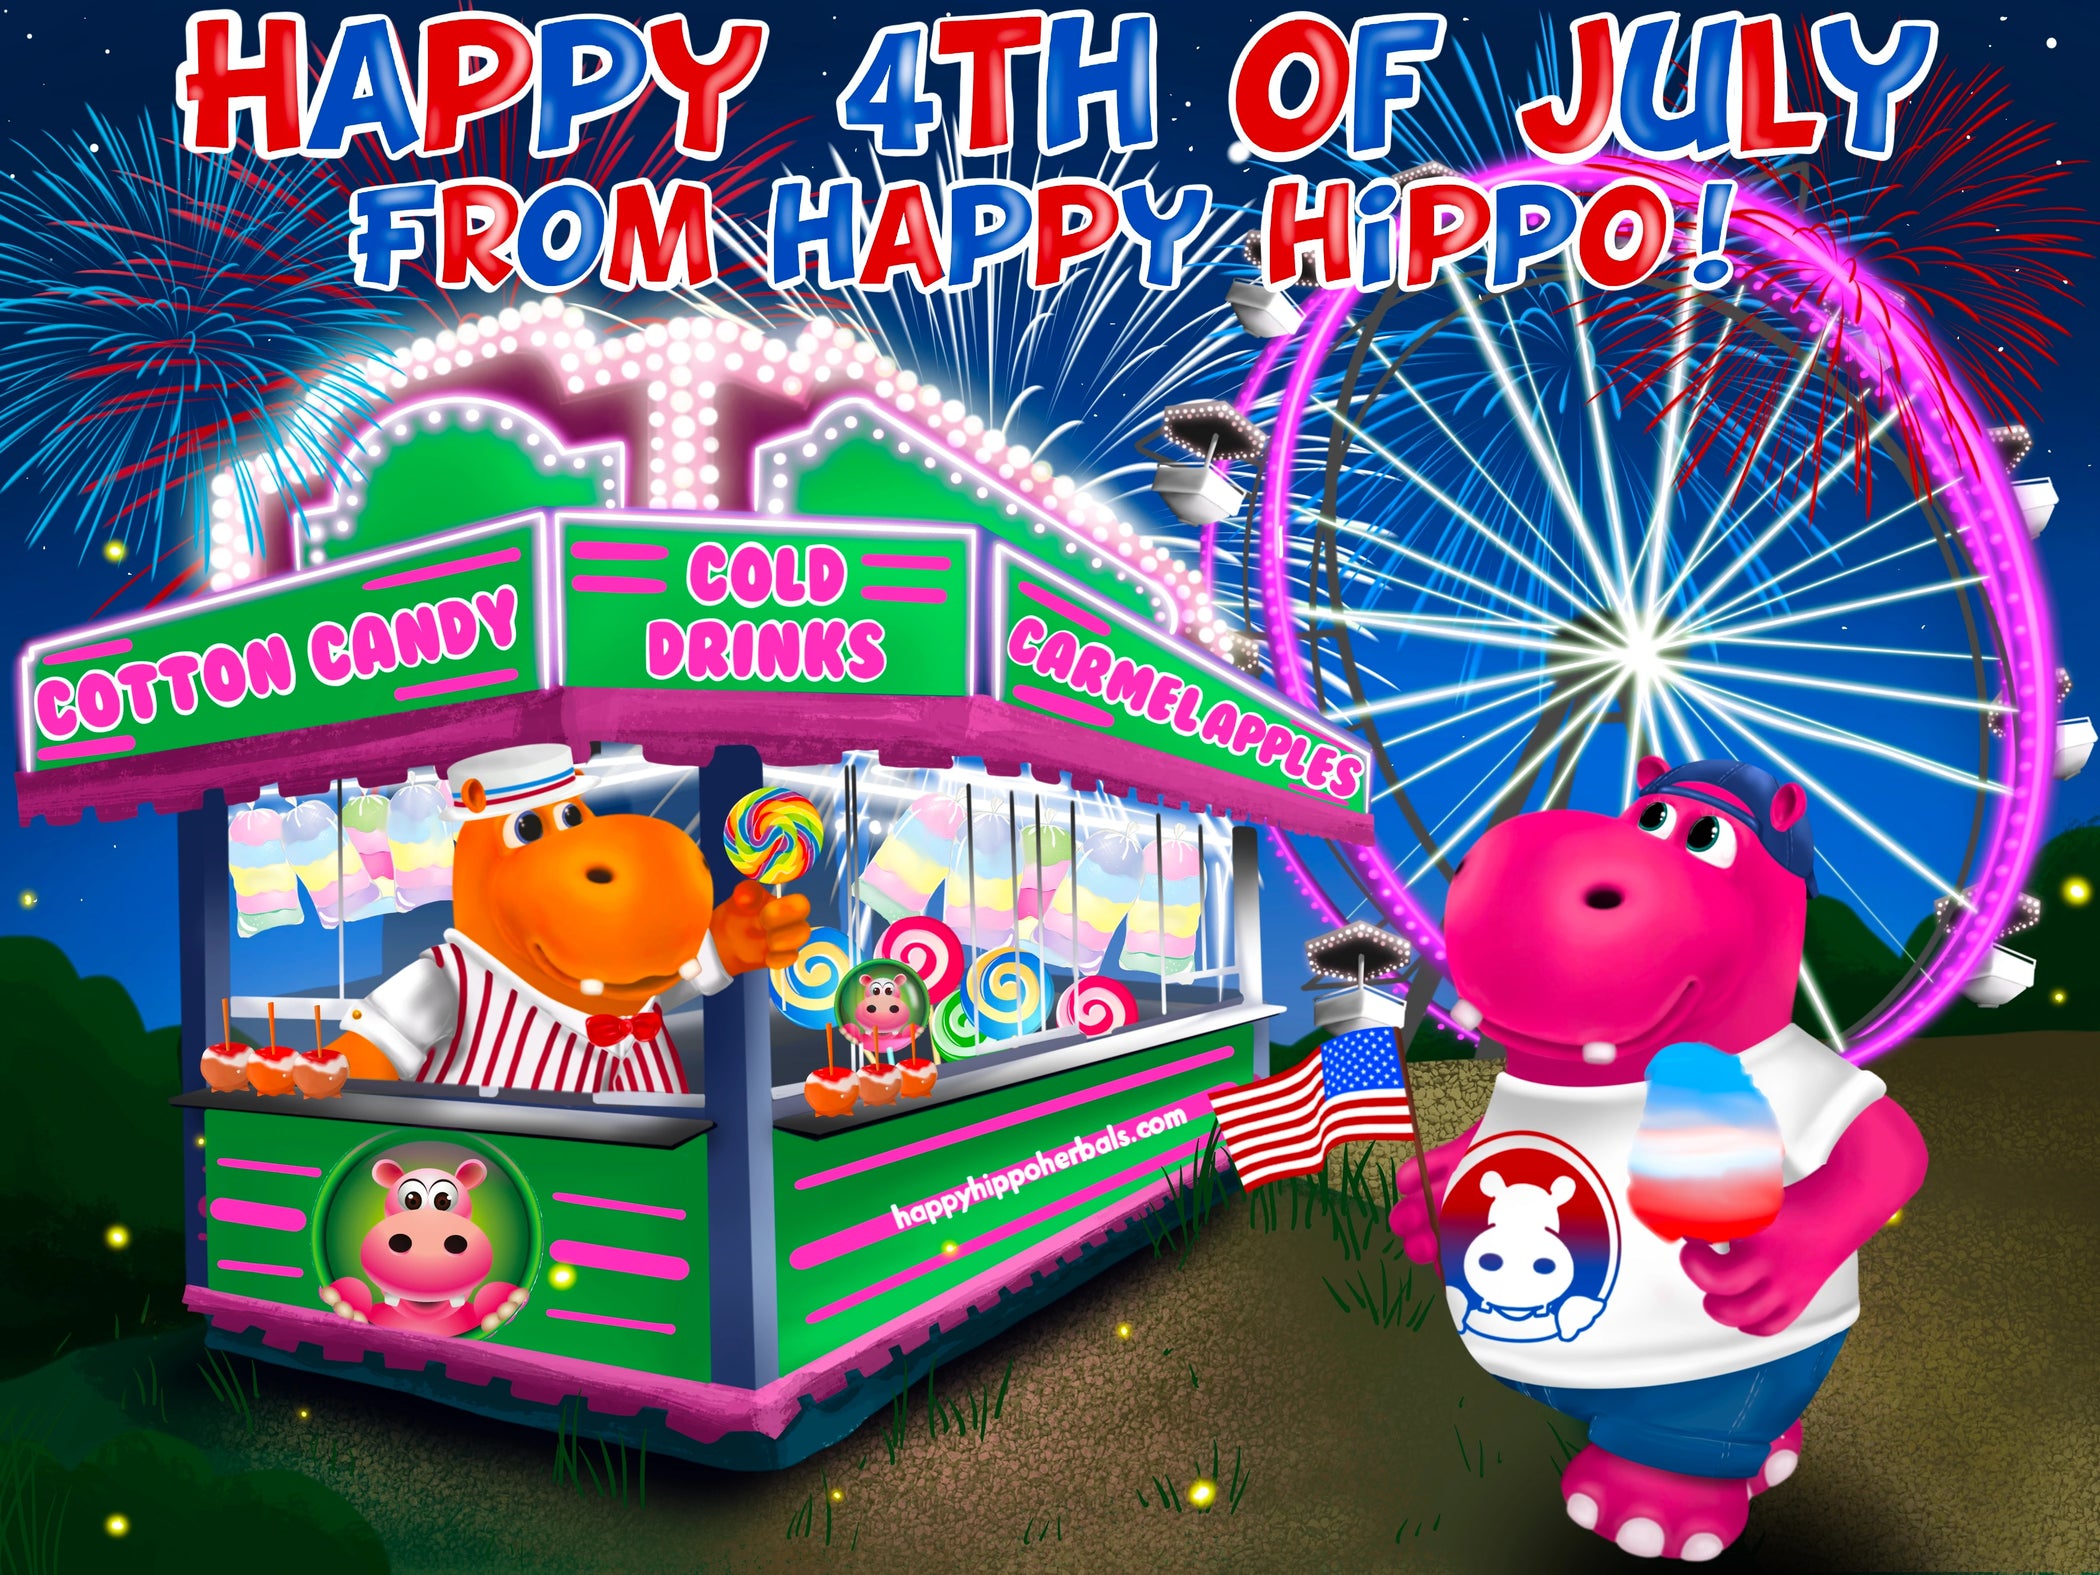 Graphic Designed image depicting Puddles the Hippo character enjoying the 4th of July celebration while buying red, white, and green kratom powder from another hippo at a food stand. American and Happy Hippo Kratom Powder, two great things that are even more great together